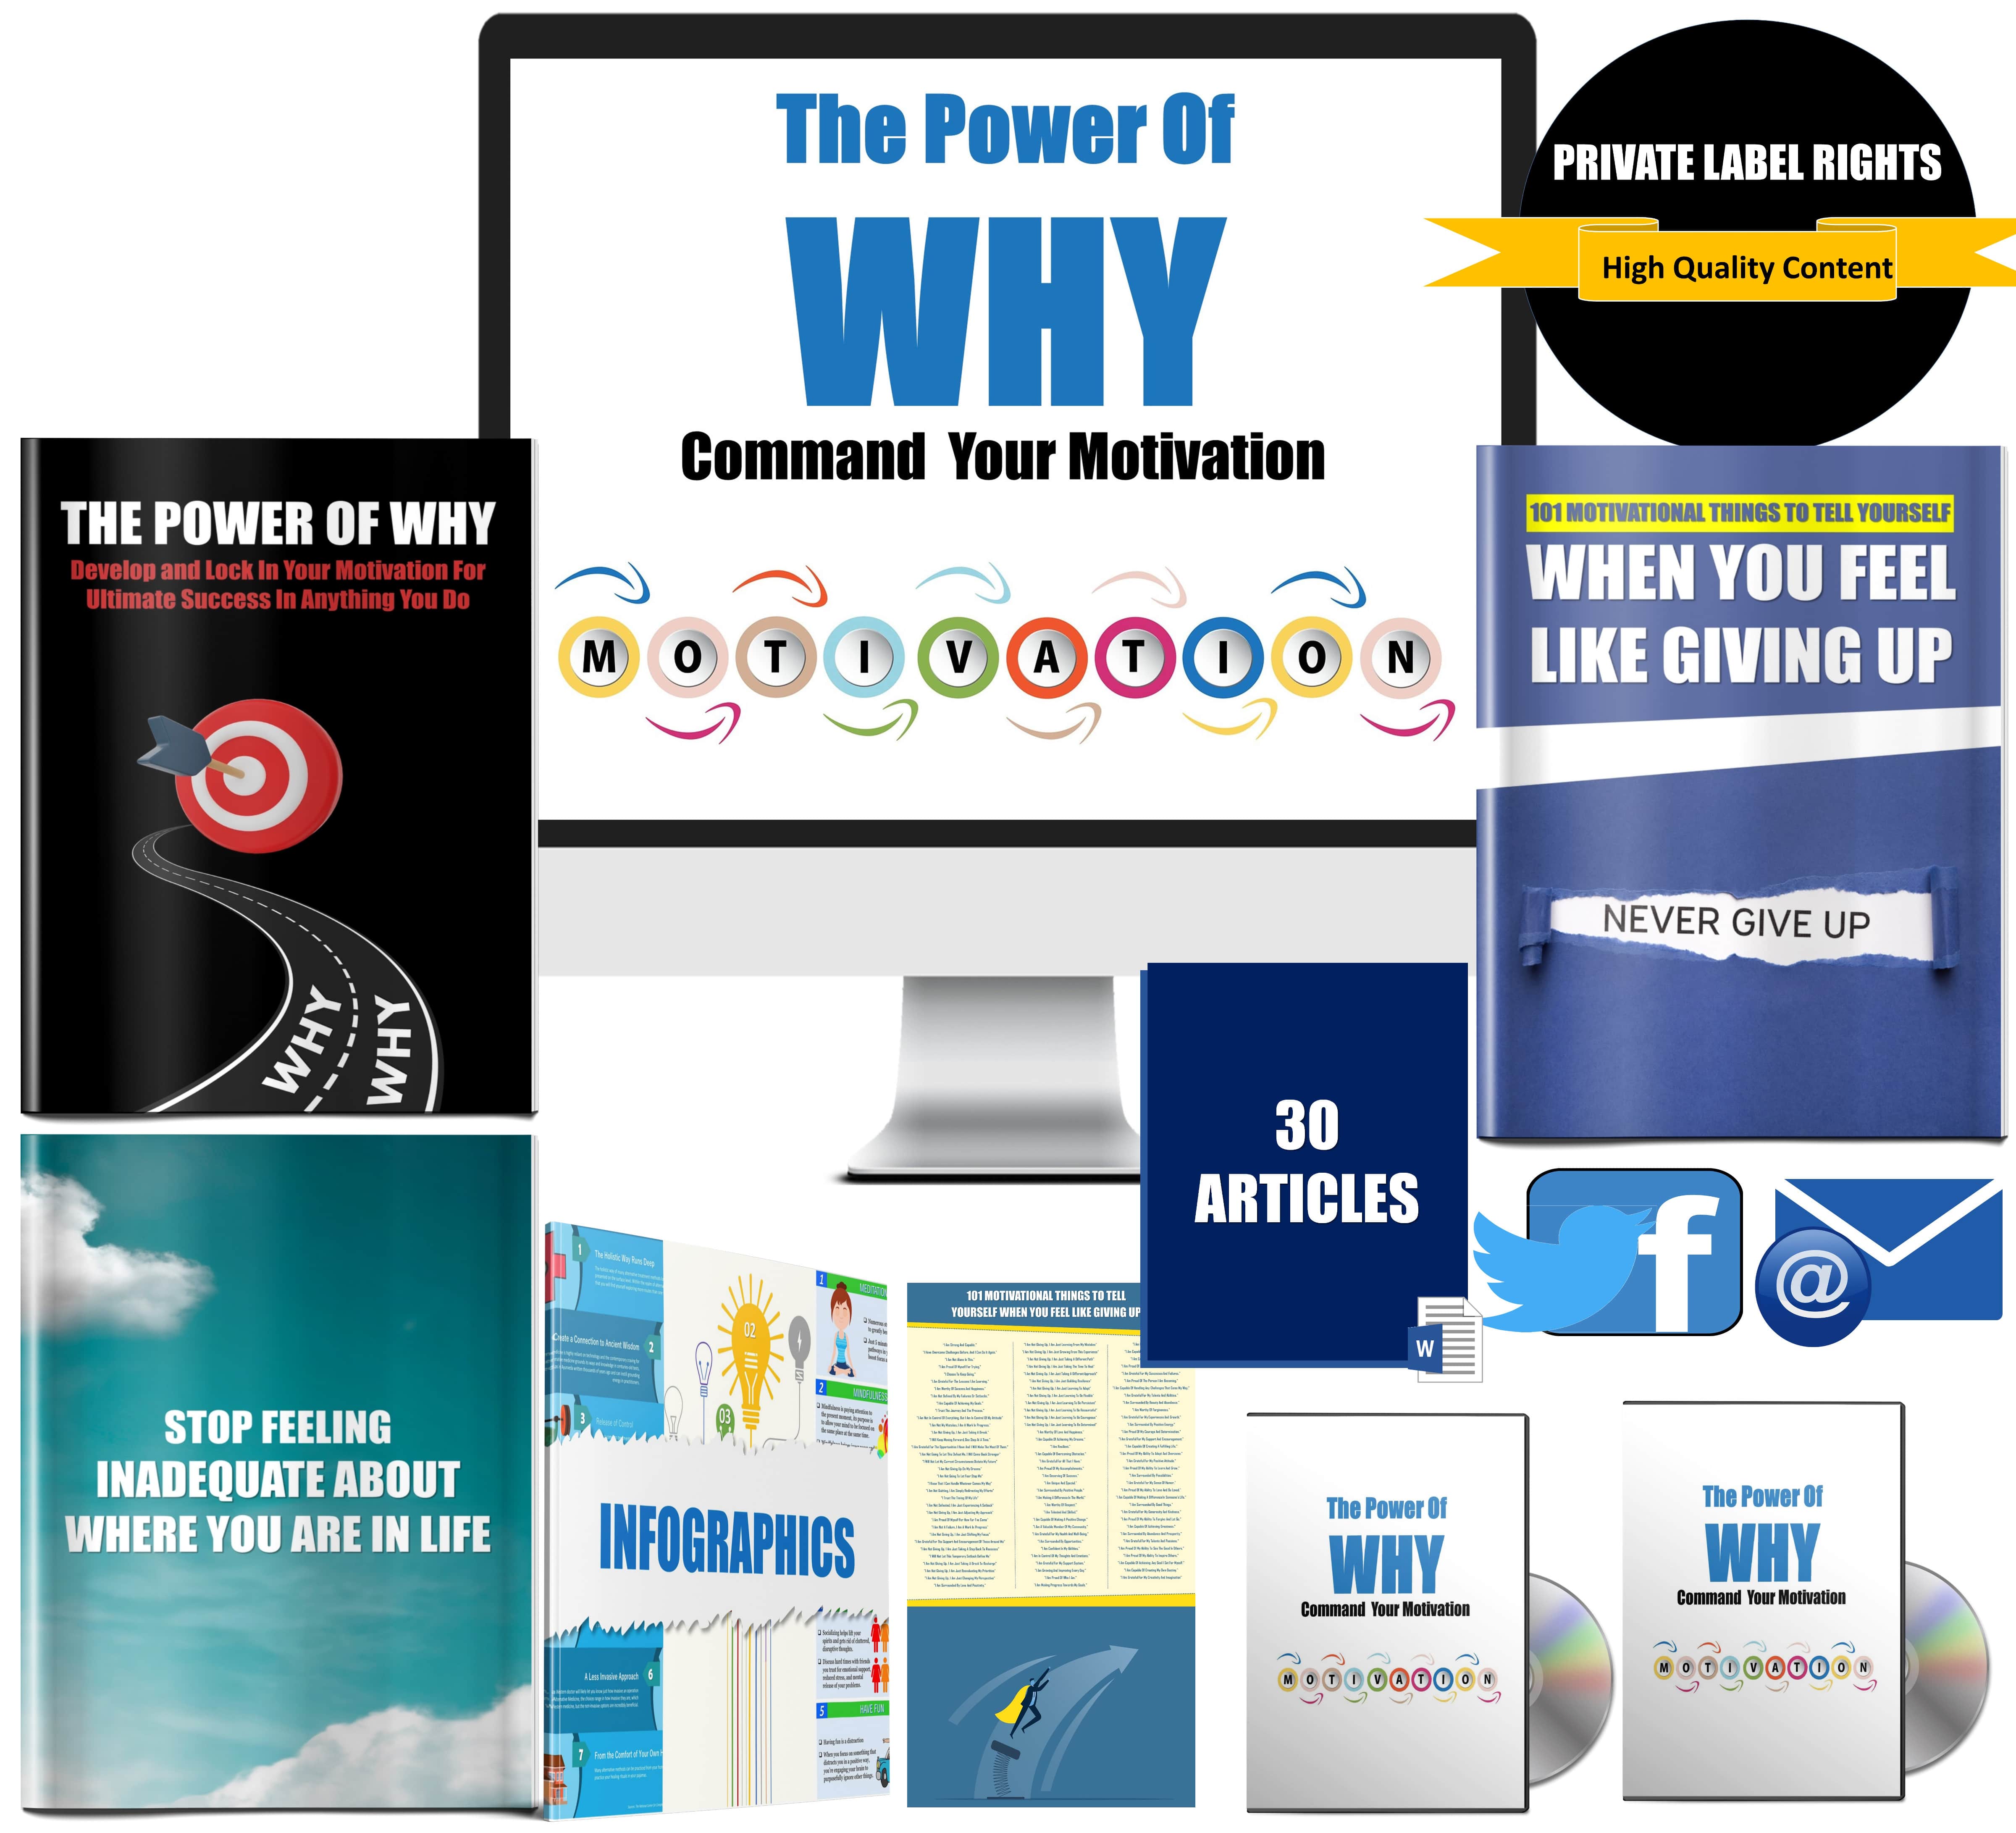 The Power Of Why: Command Your Motivation Giant PLR Giant Content Pack PLR Rights